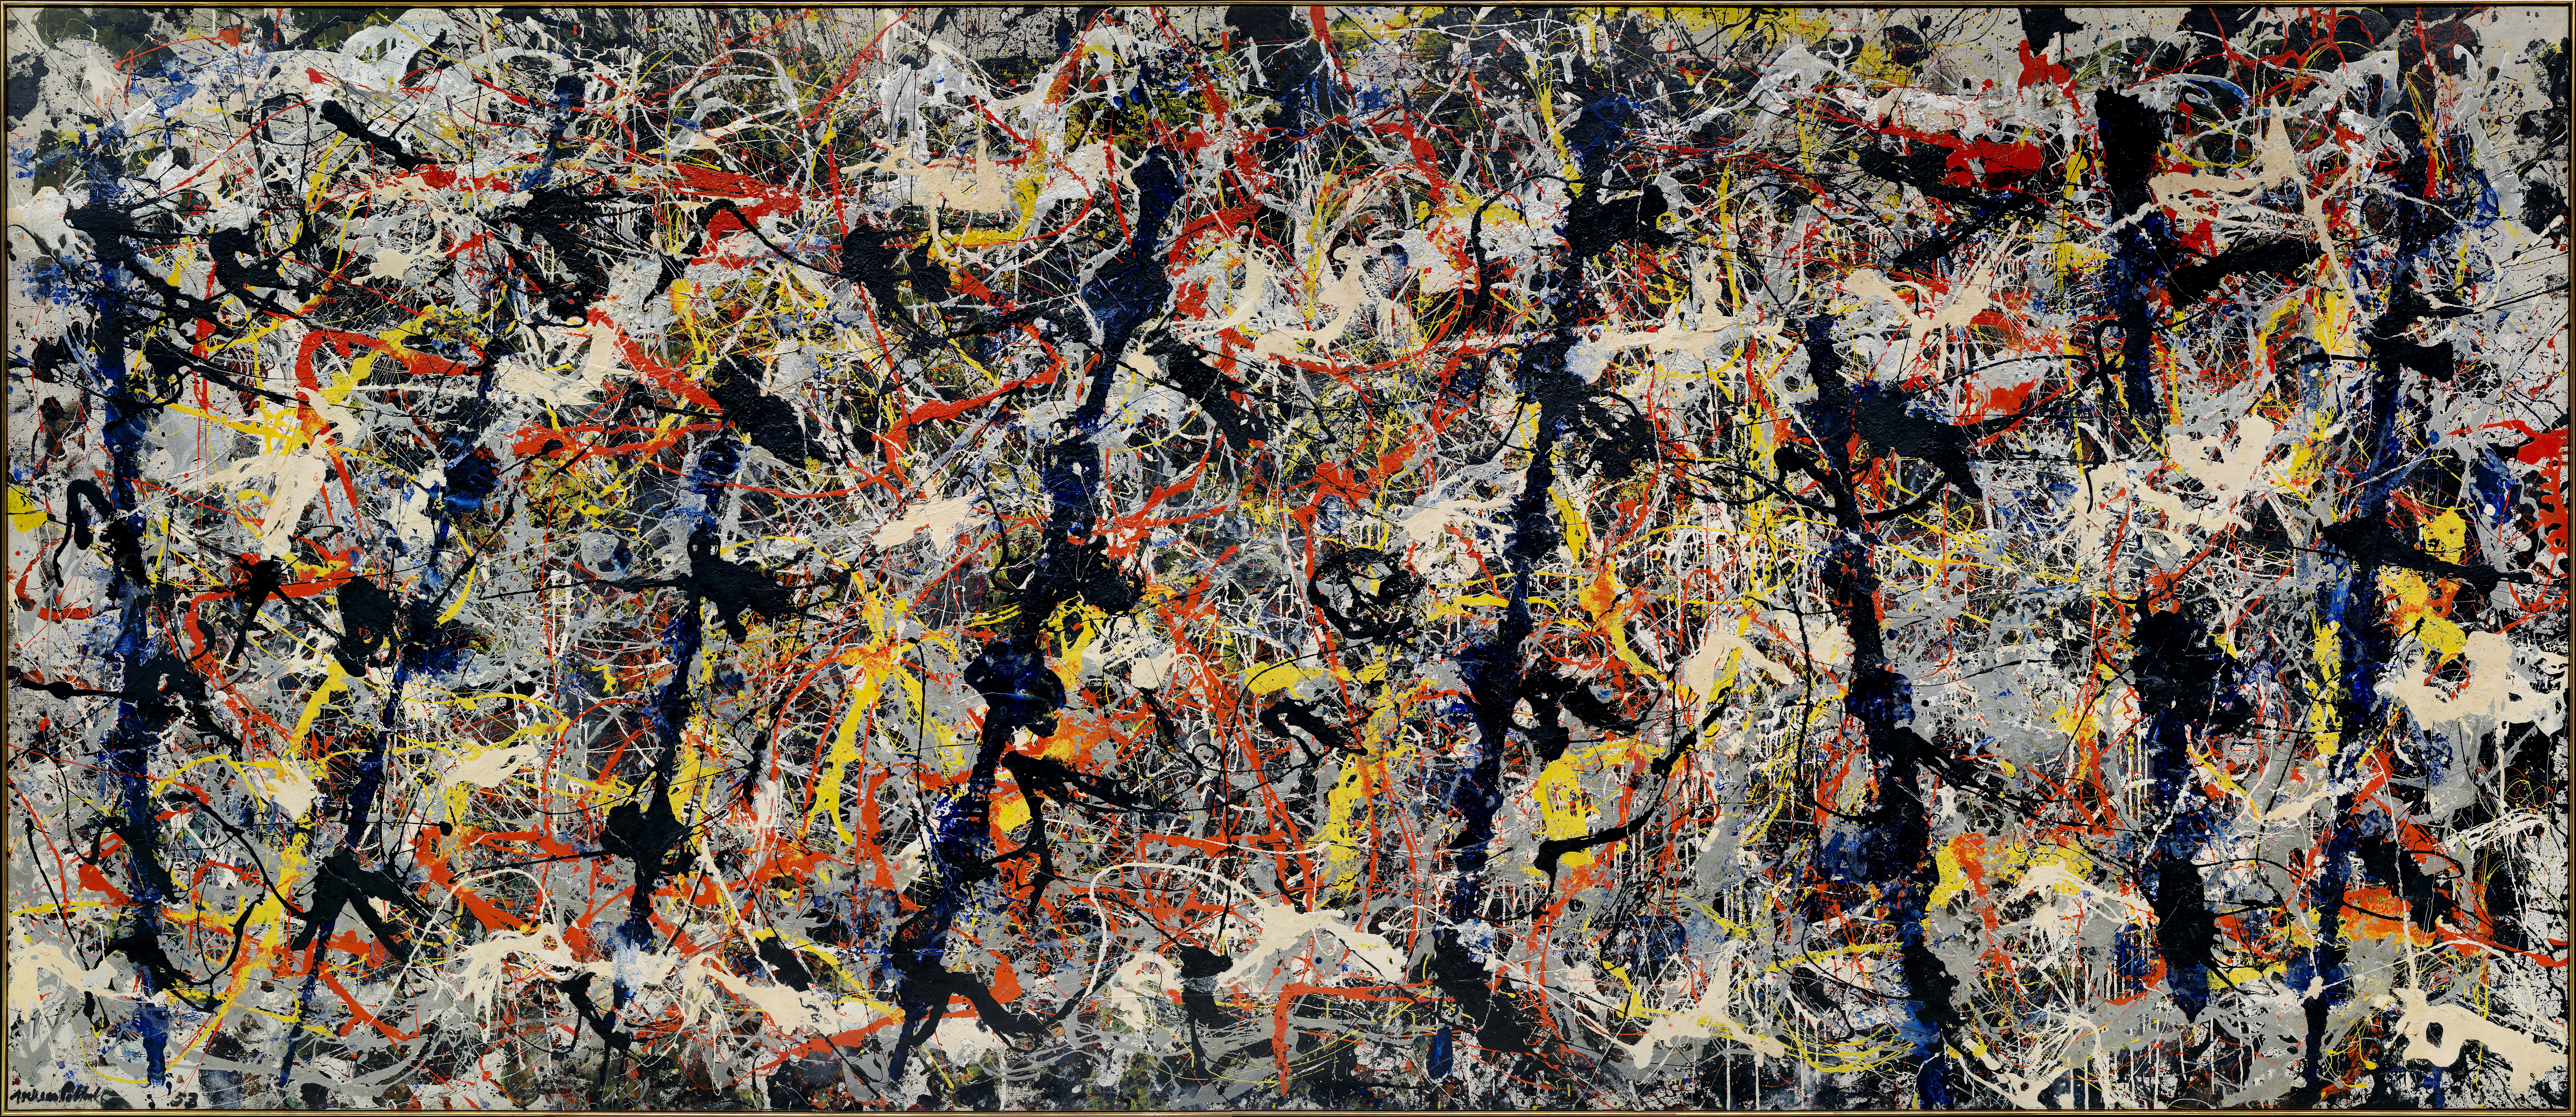 The work of Jackson Pollock bears more than a passing resemblance to the work of female quilters.